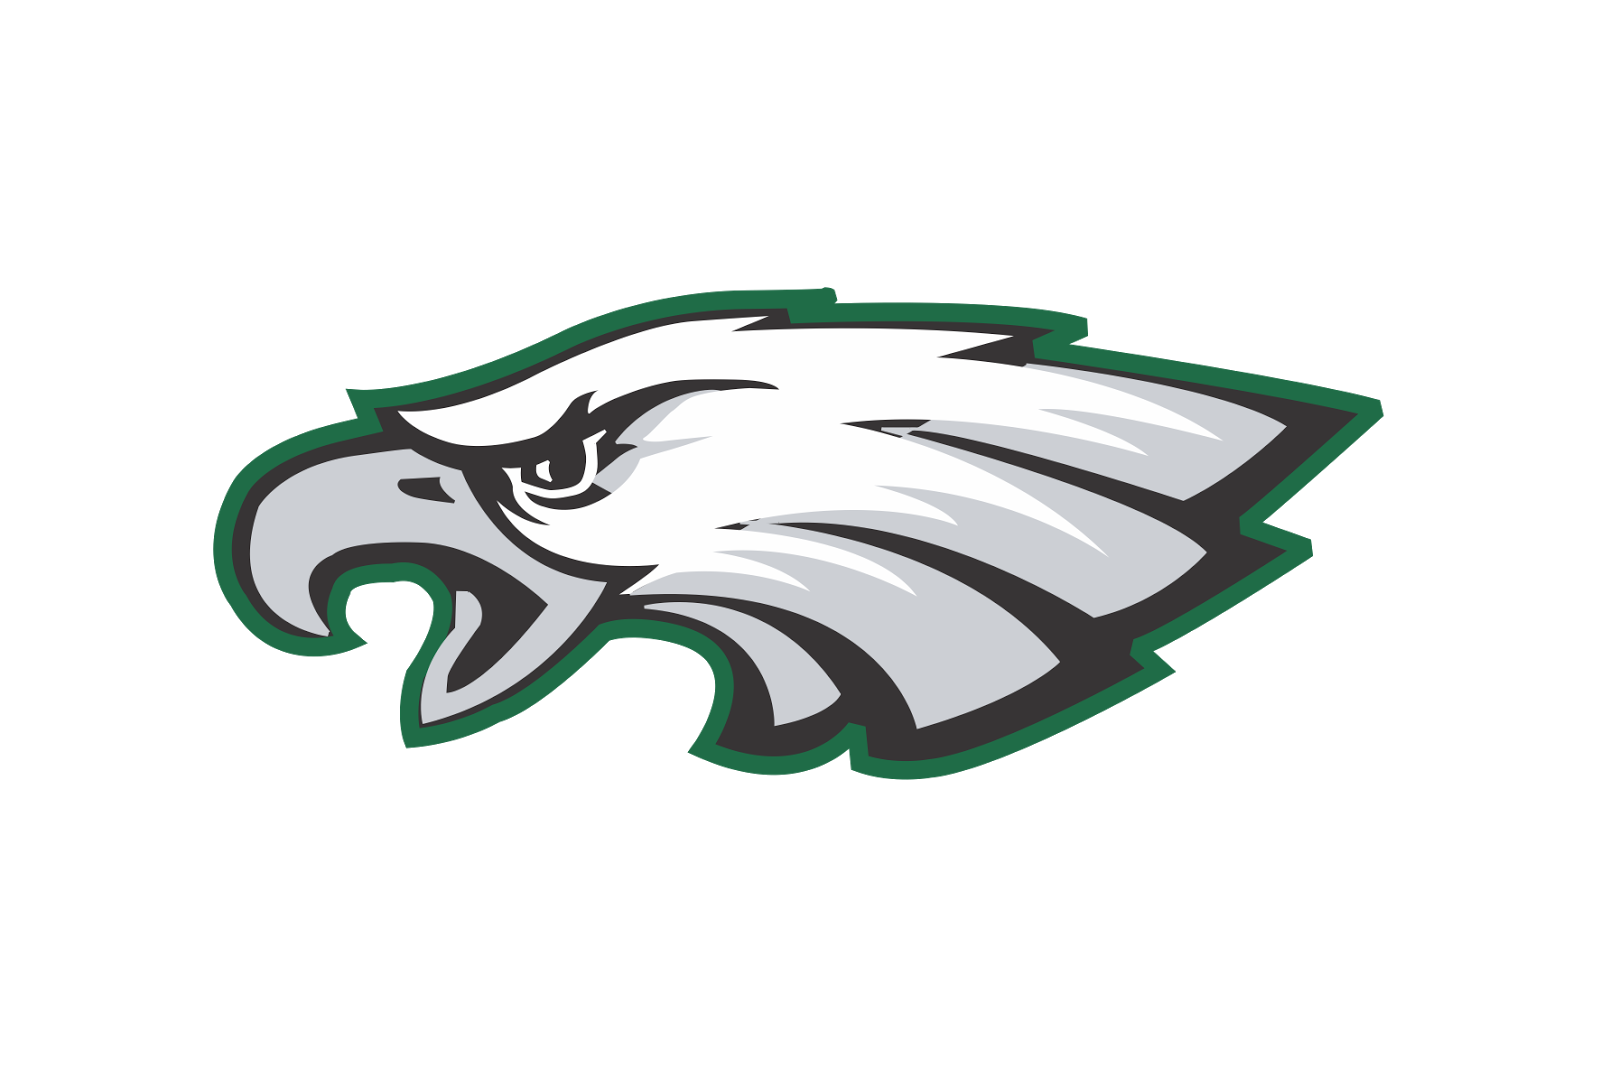 eagle clipart philly